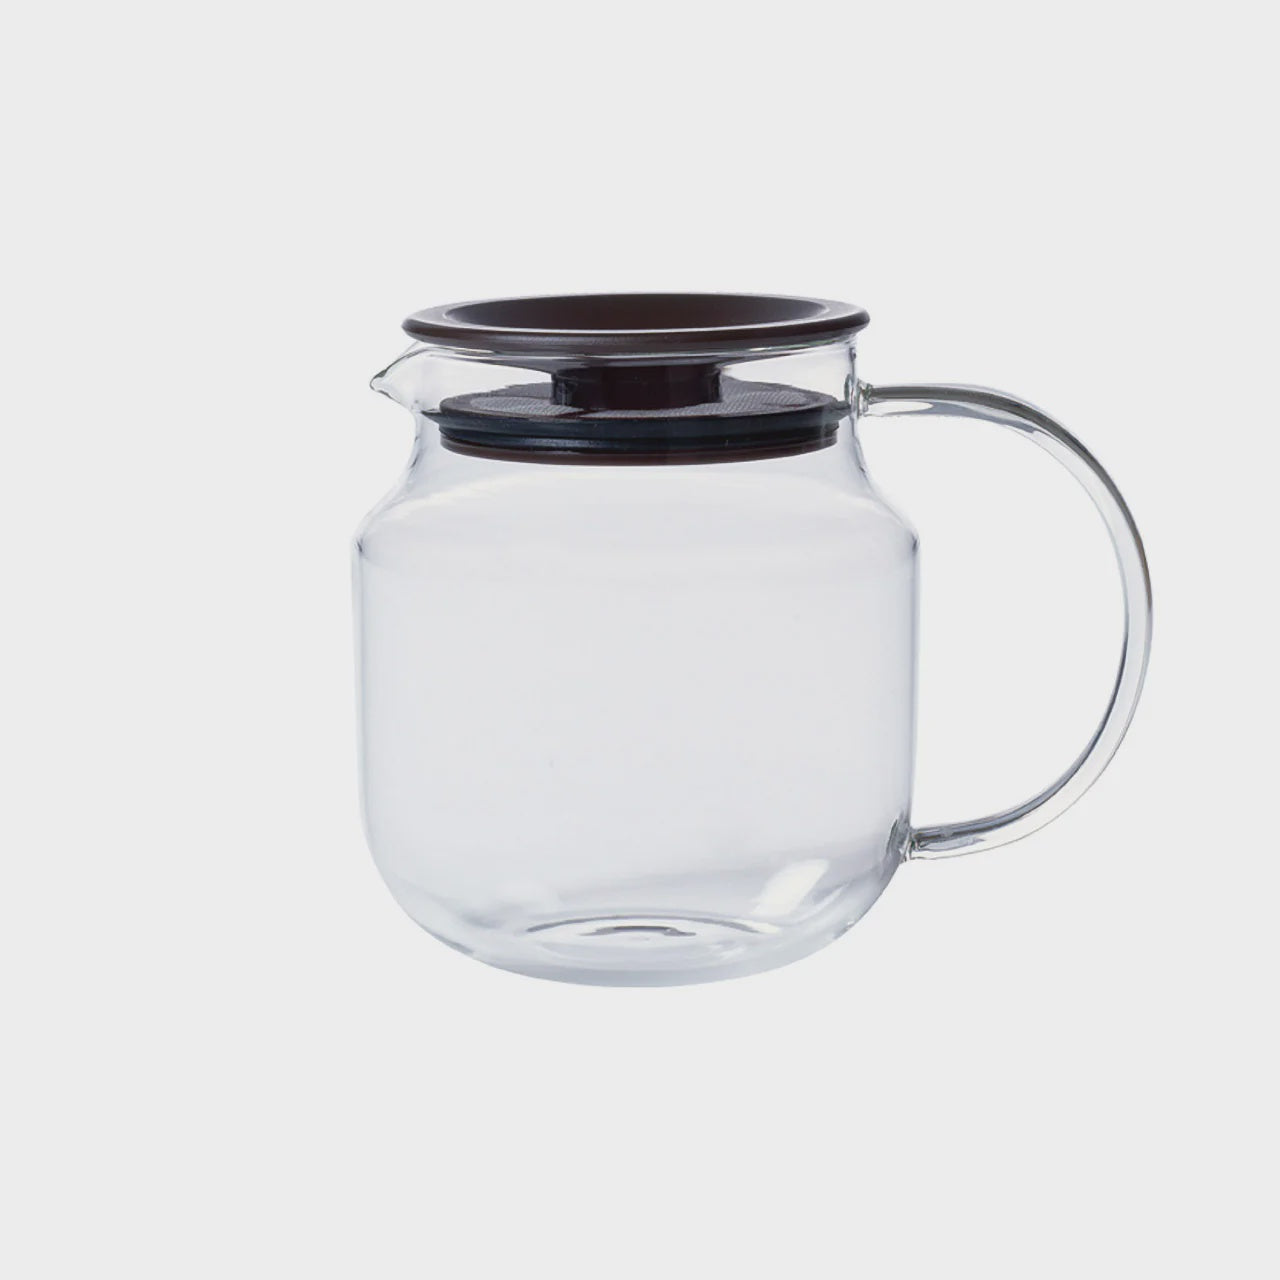 Teapot One Touch 620ml